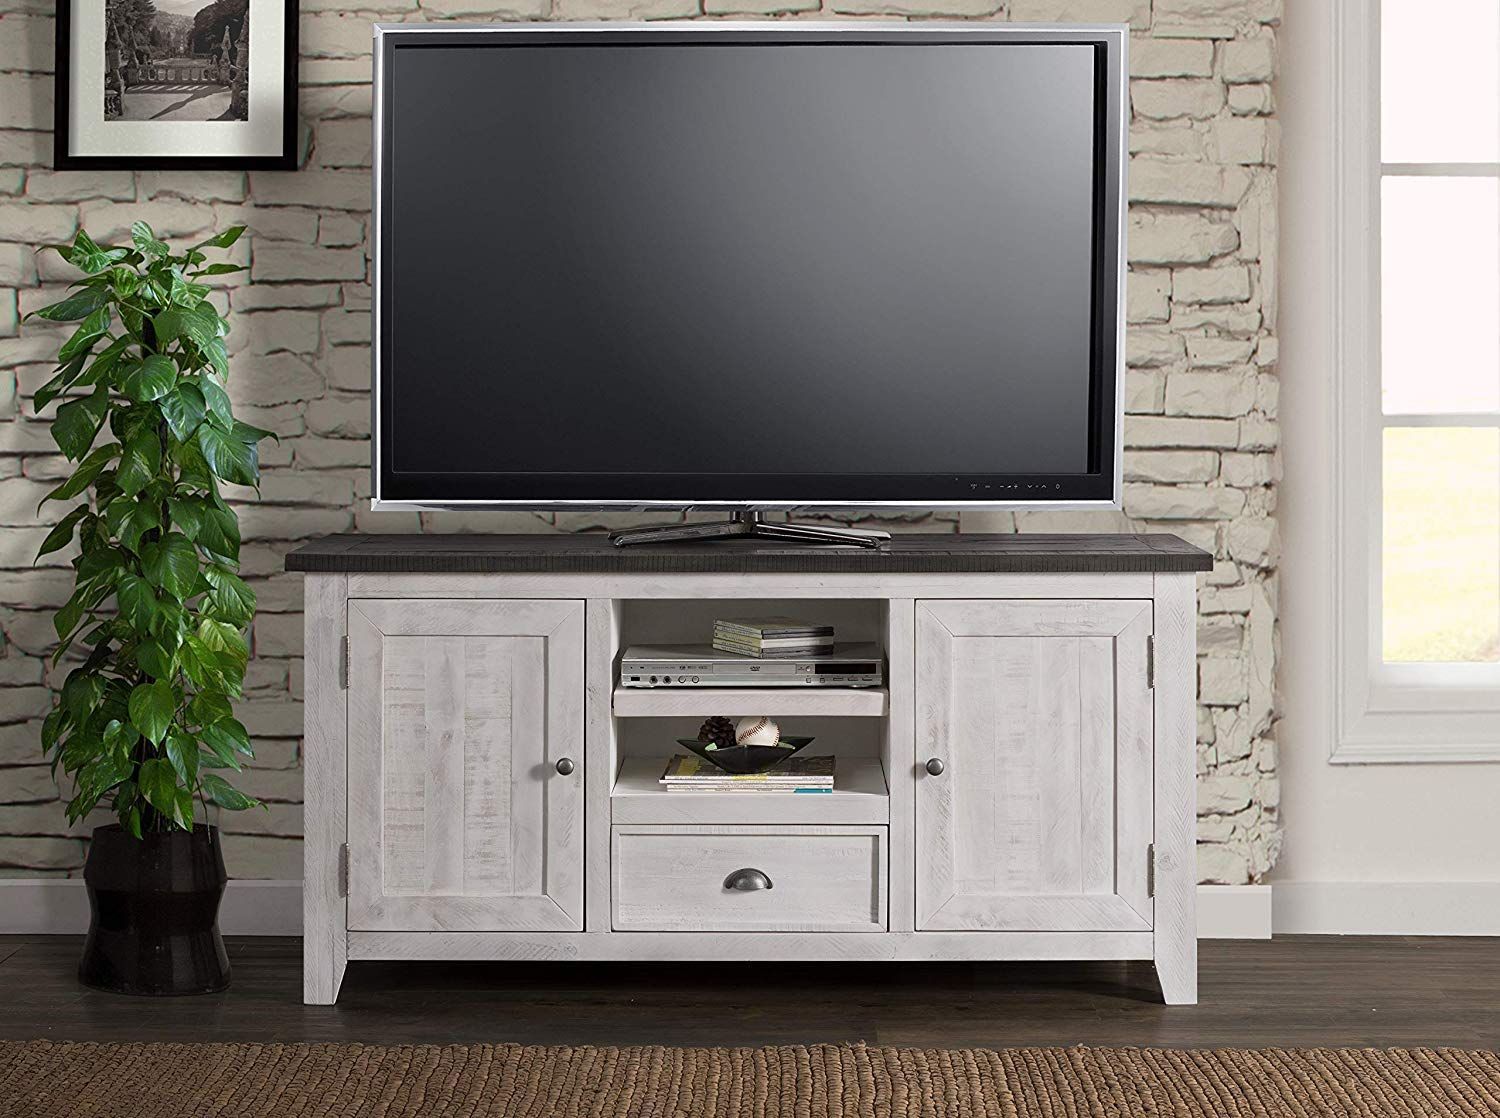 Farmhouse Tv Stand: Cozy And Functional Entertainment Centers – Farmhouse  Goals | Farmhouse Tv Stand, Rustic Tv Stand, Solid Wood Tv Stand Within Farmhouse Tv Stands (Photo 8 of 15)